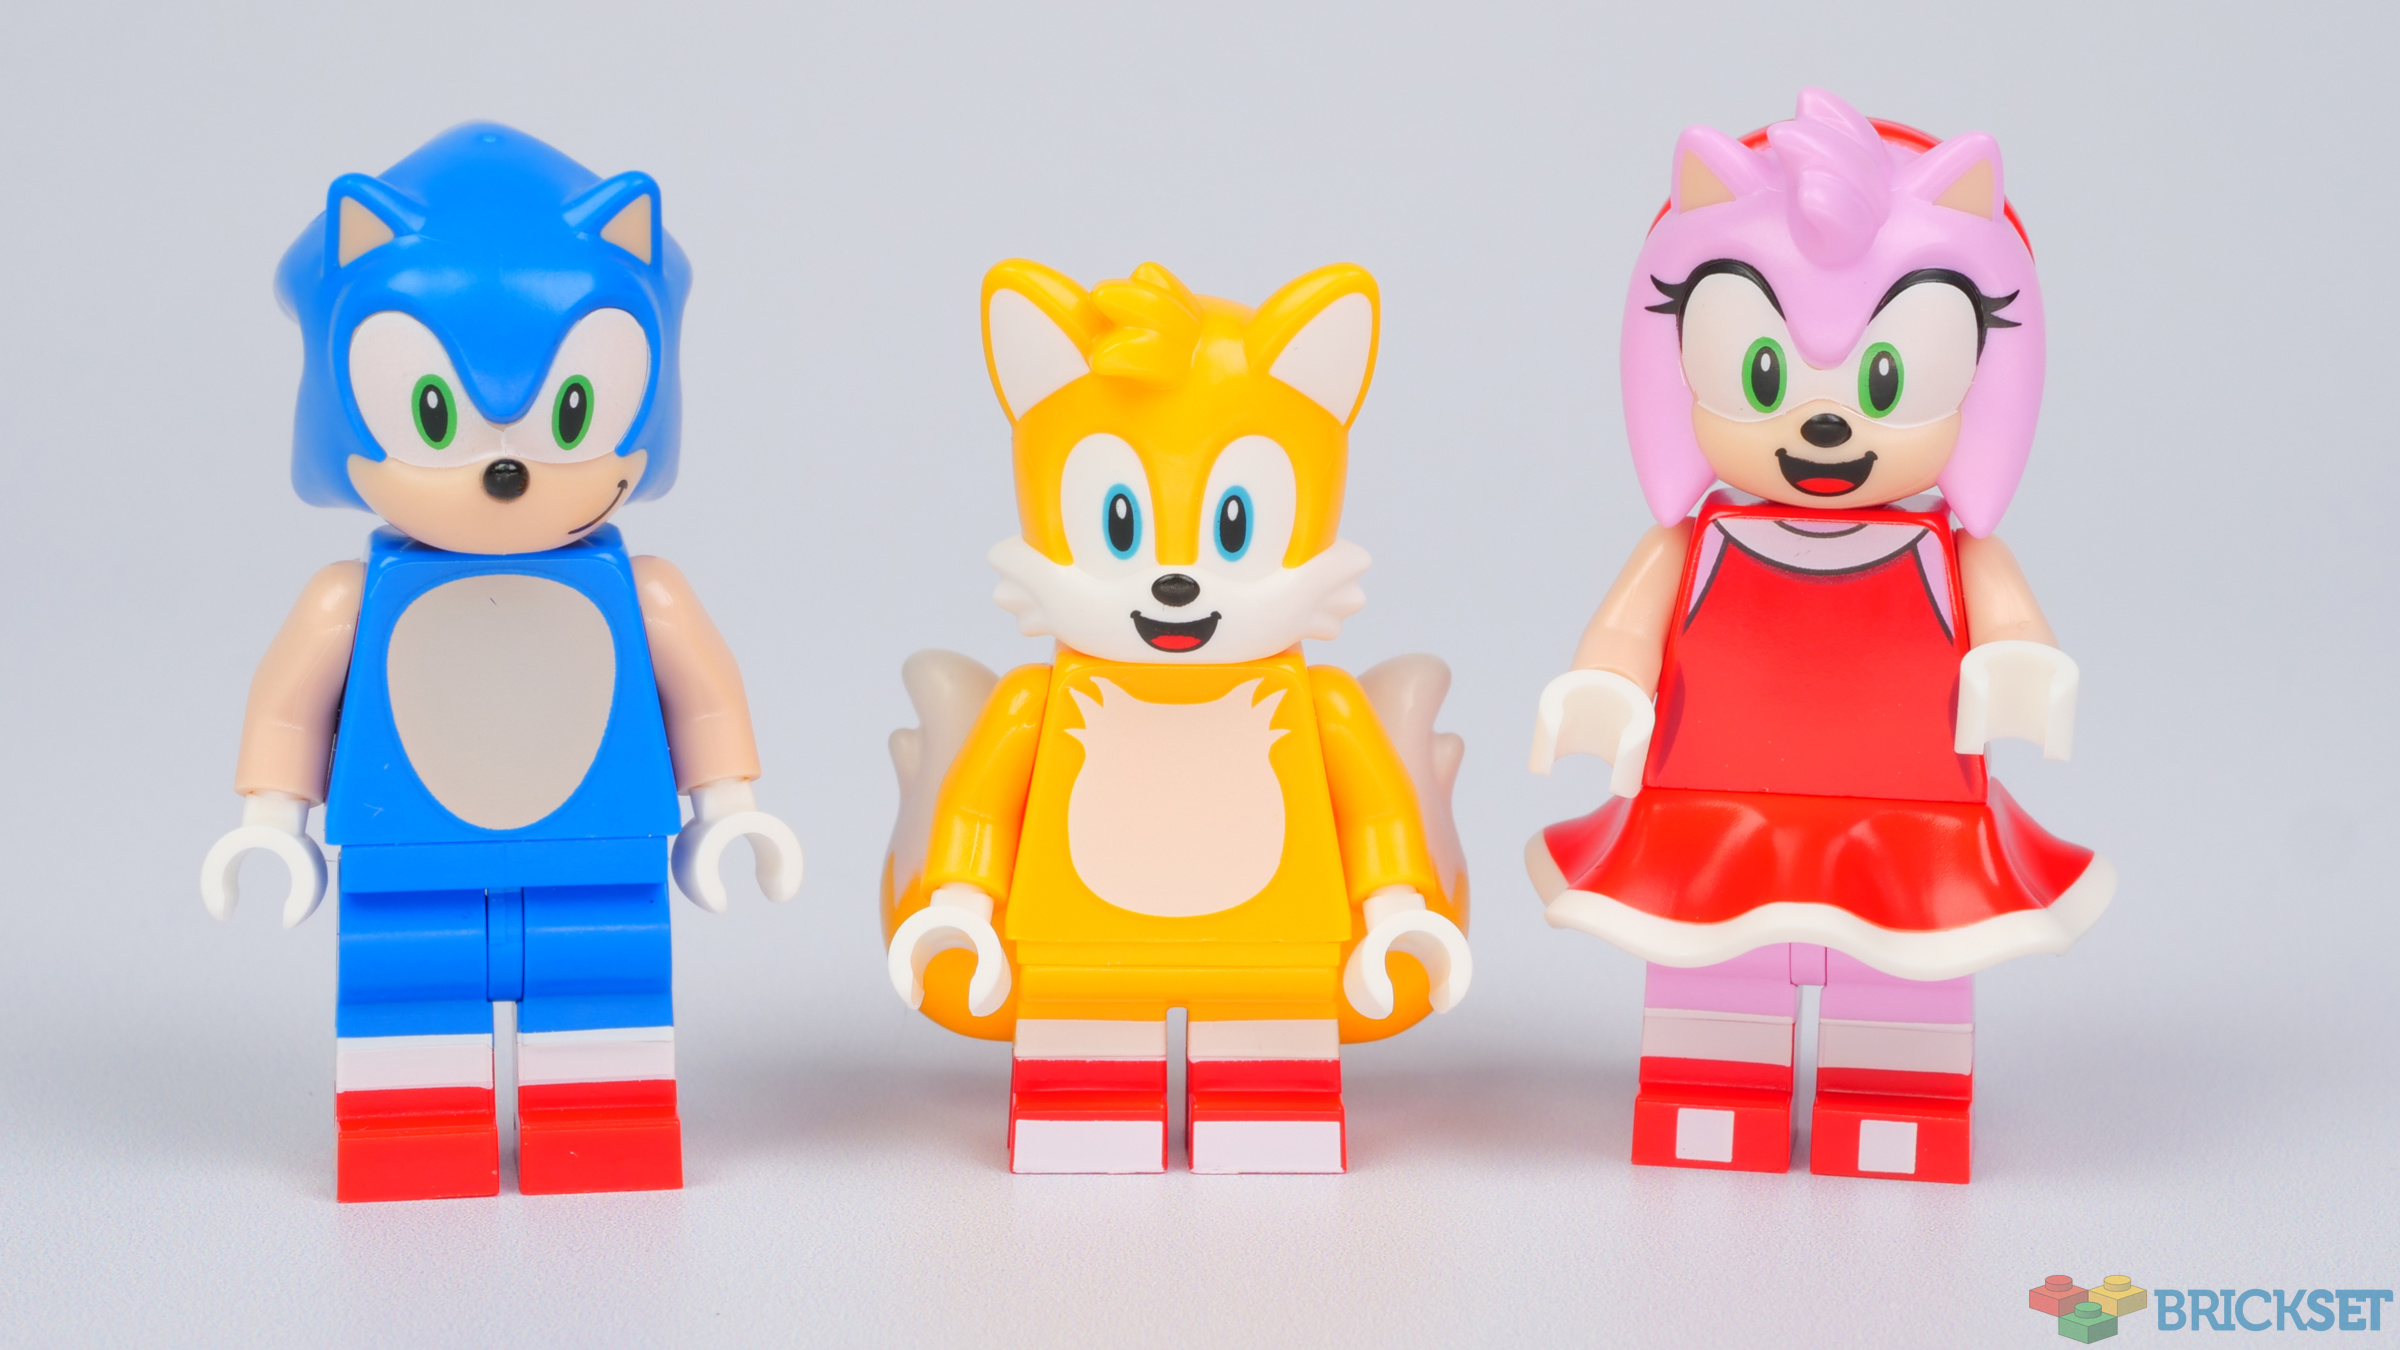 Here's a closer look at Sonic the Hedgehog in LEGO Dimensions